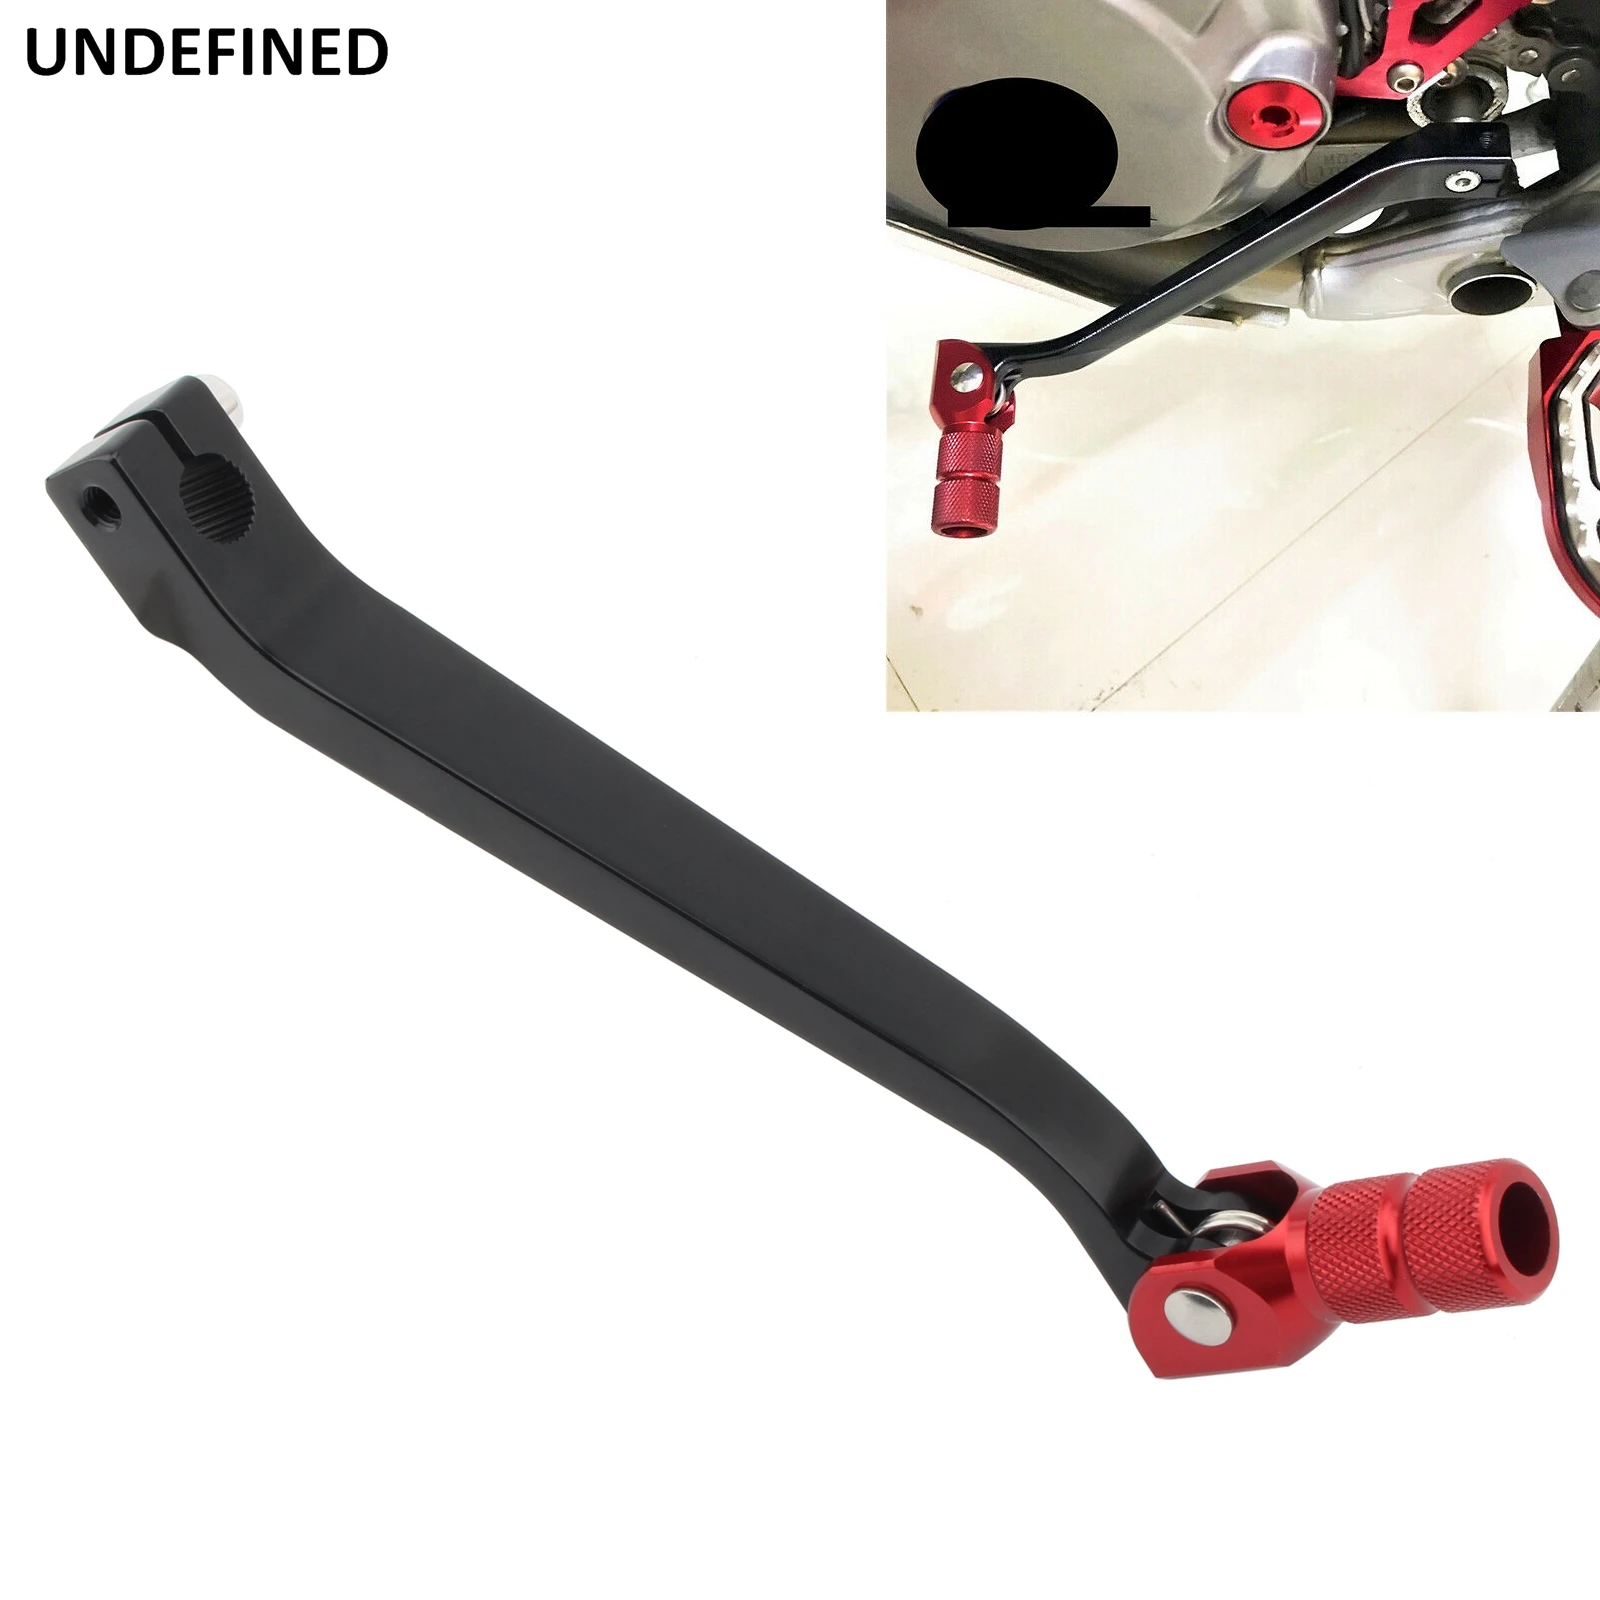 

Motorcycle Accessories For Honda CRF250 RALLY CRF250L CRF250M CRF 250 L M CRF 250L Rear Gear Shift Lever Pedal Foot Shifter Rod